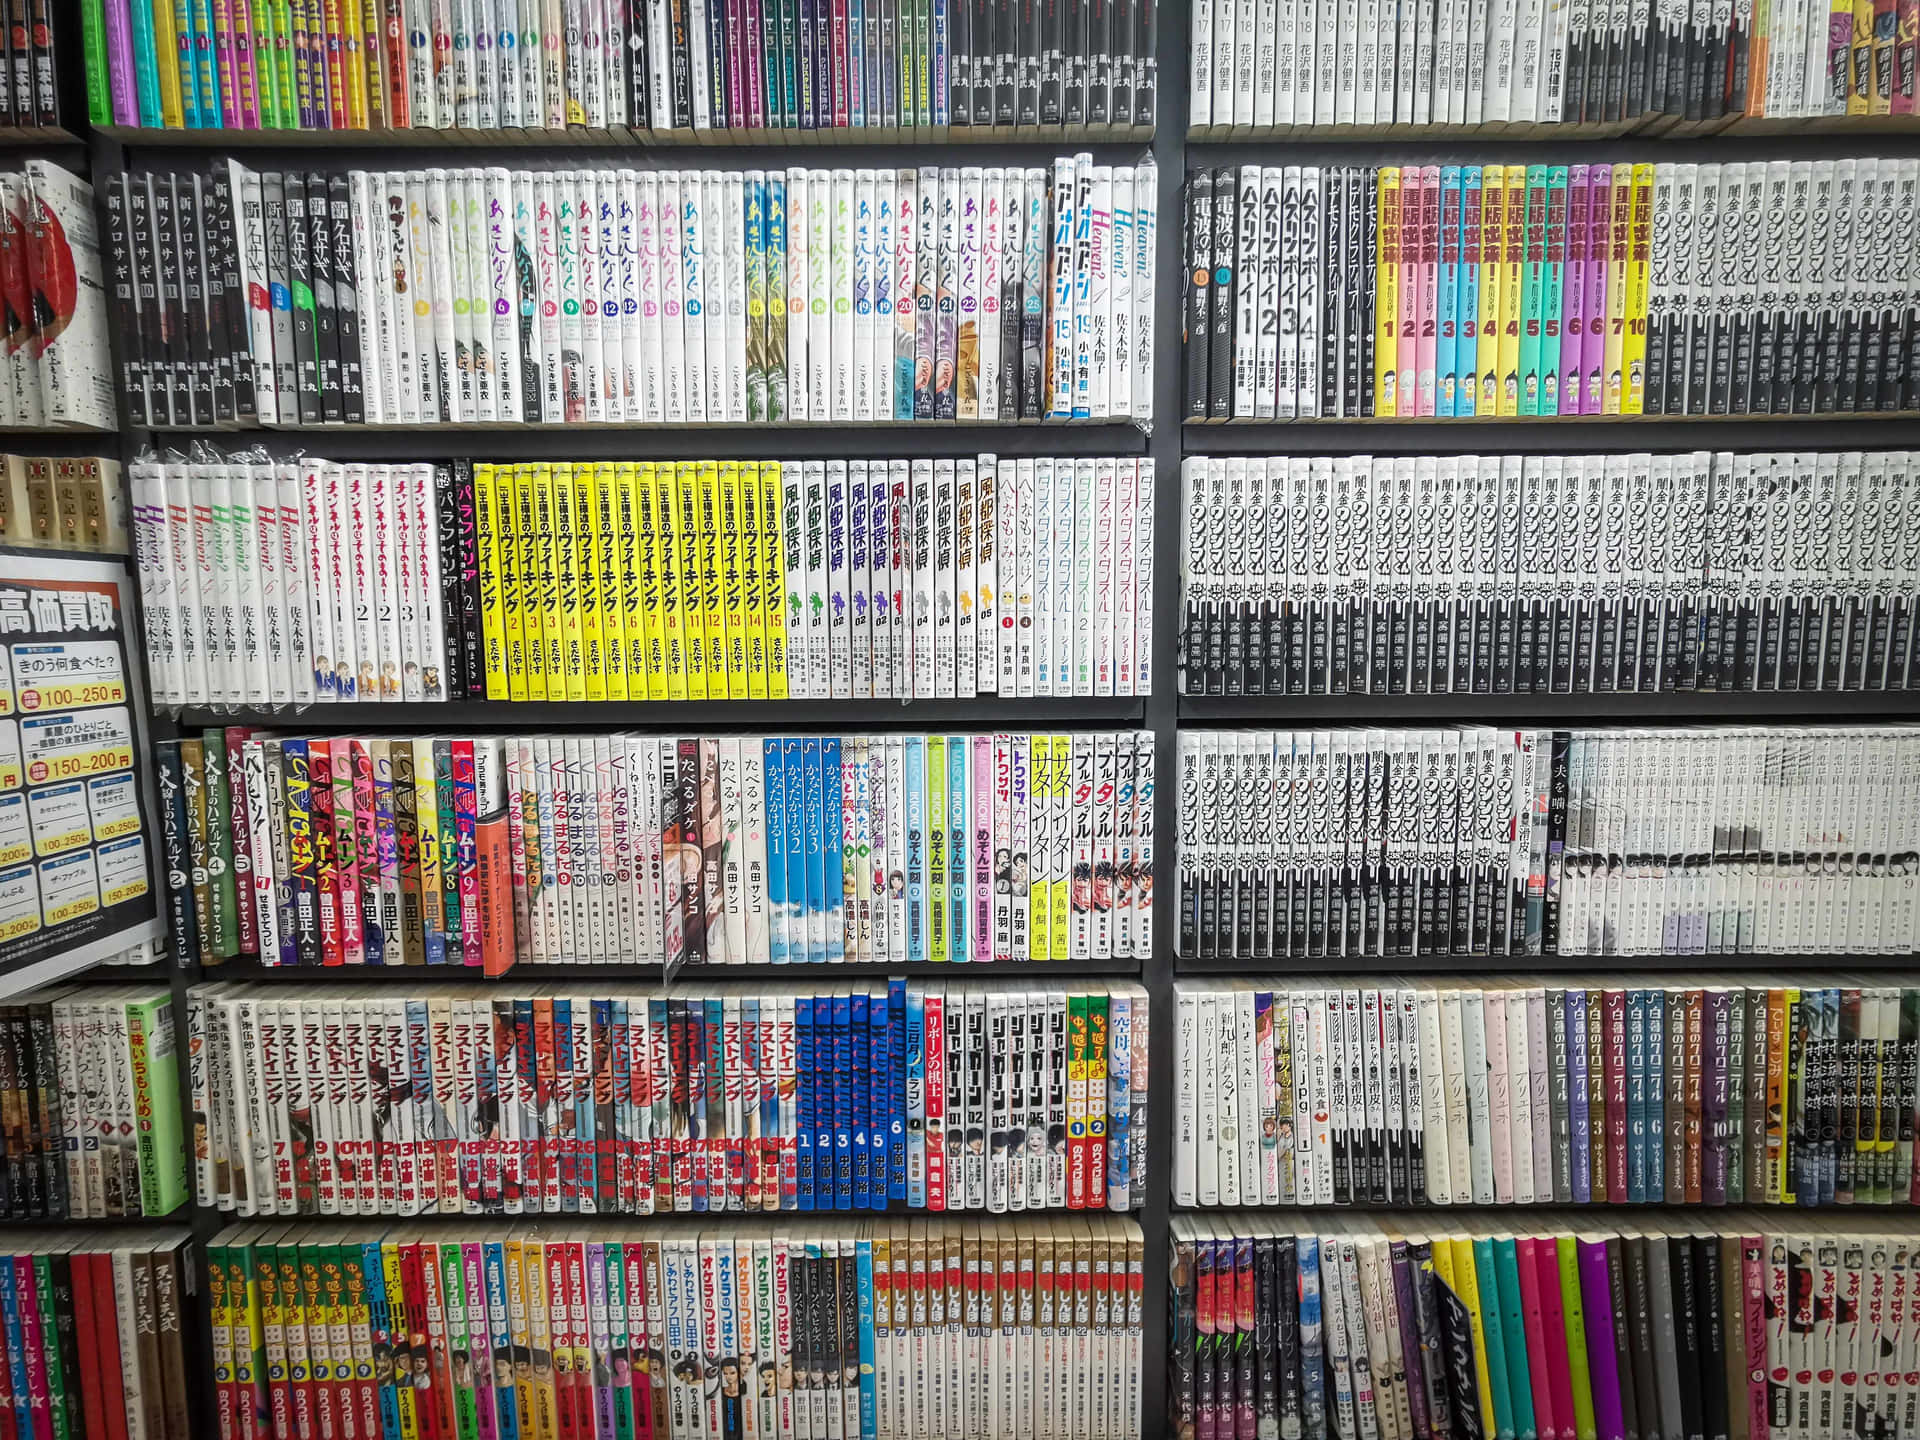 A Shelf Full Of Books With Many Different Colors